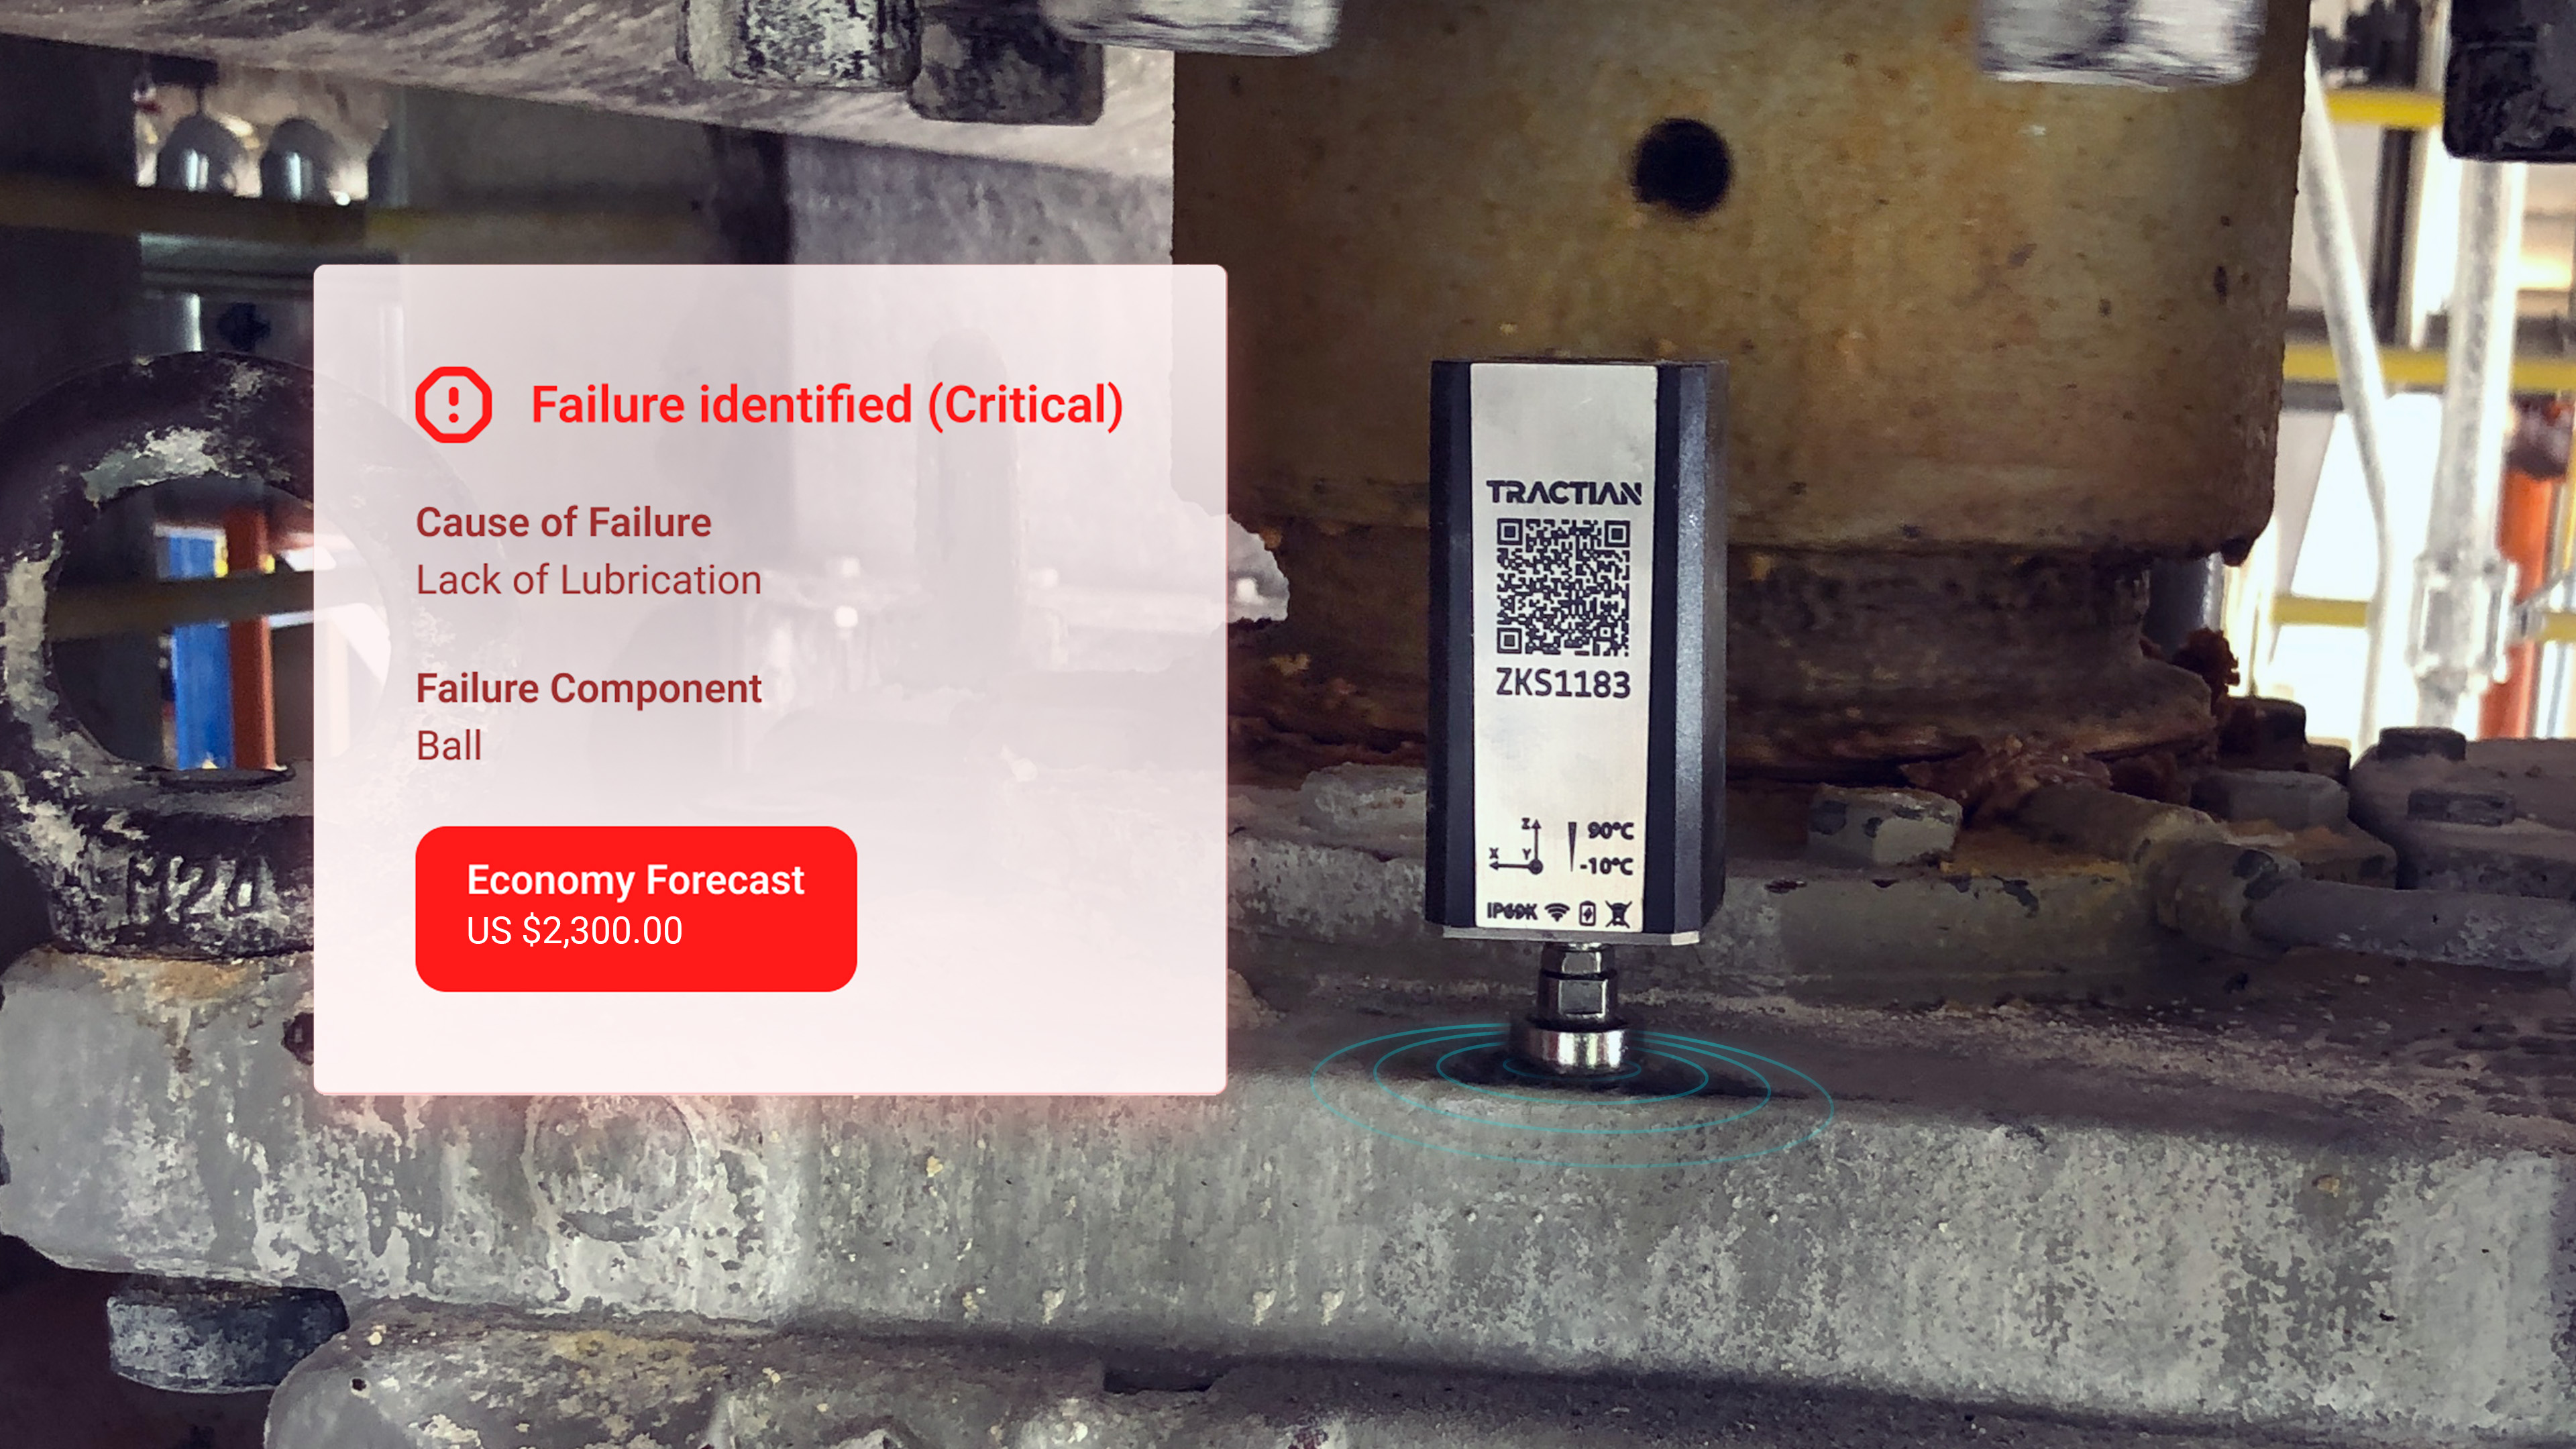 TRACTIAN identifies potential machine failures and gives you the steps you need to take action.